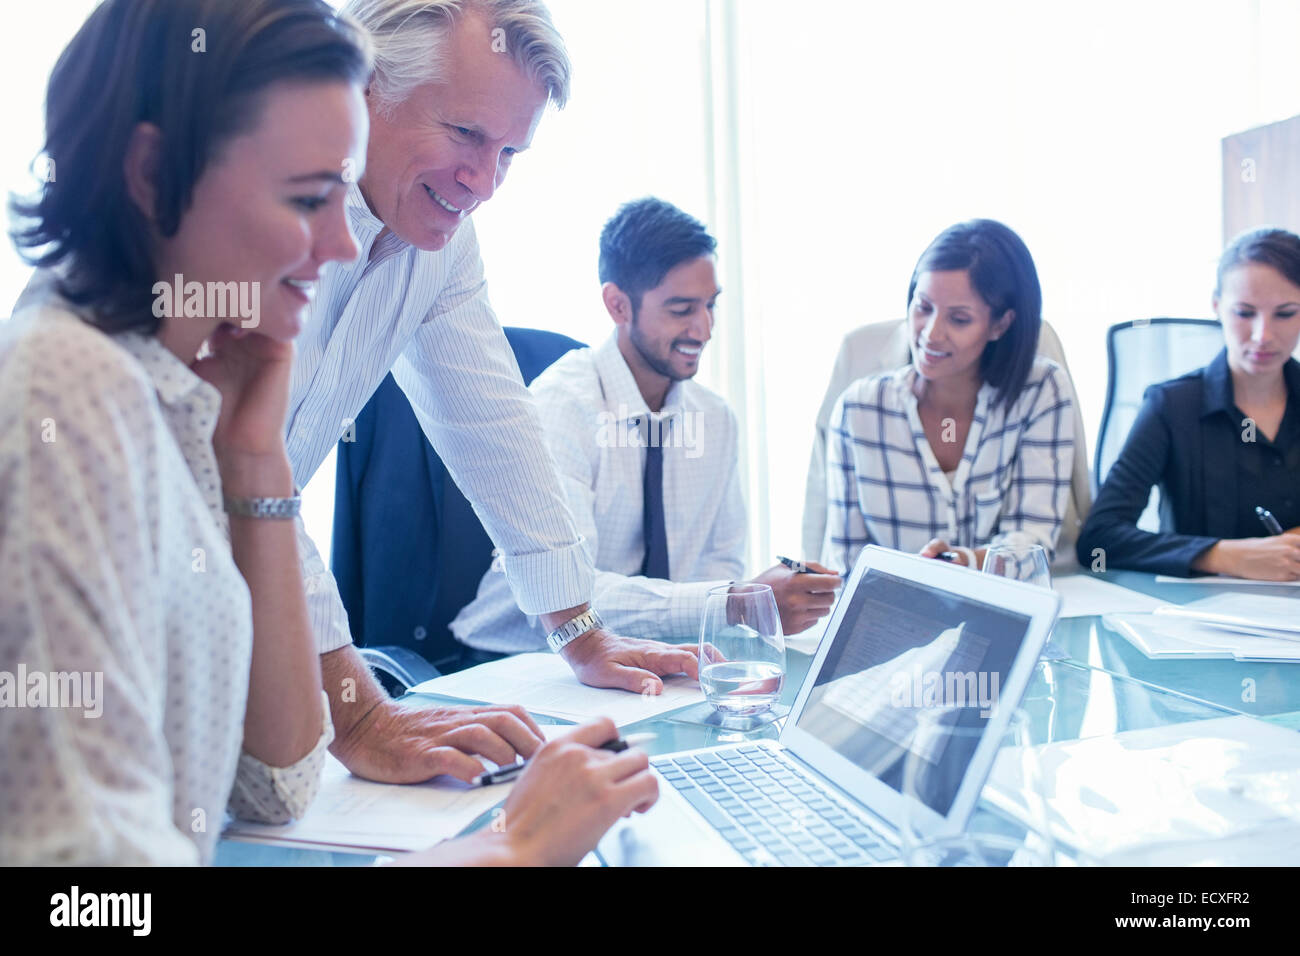 Businesswomen and businessmen sitting at conference table, using laptop and smiling Stock Photo